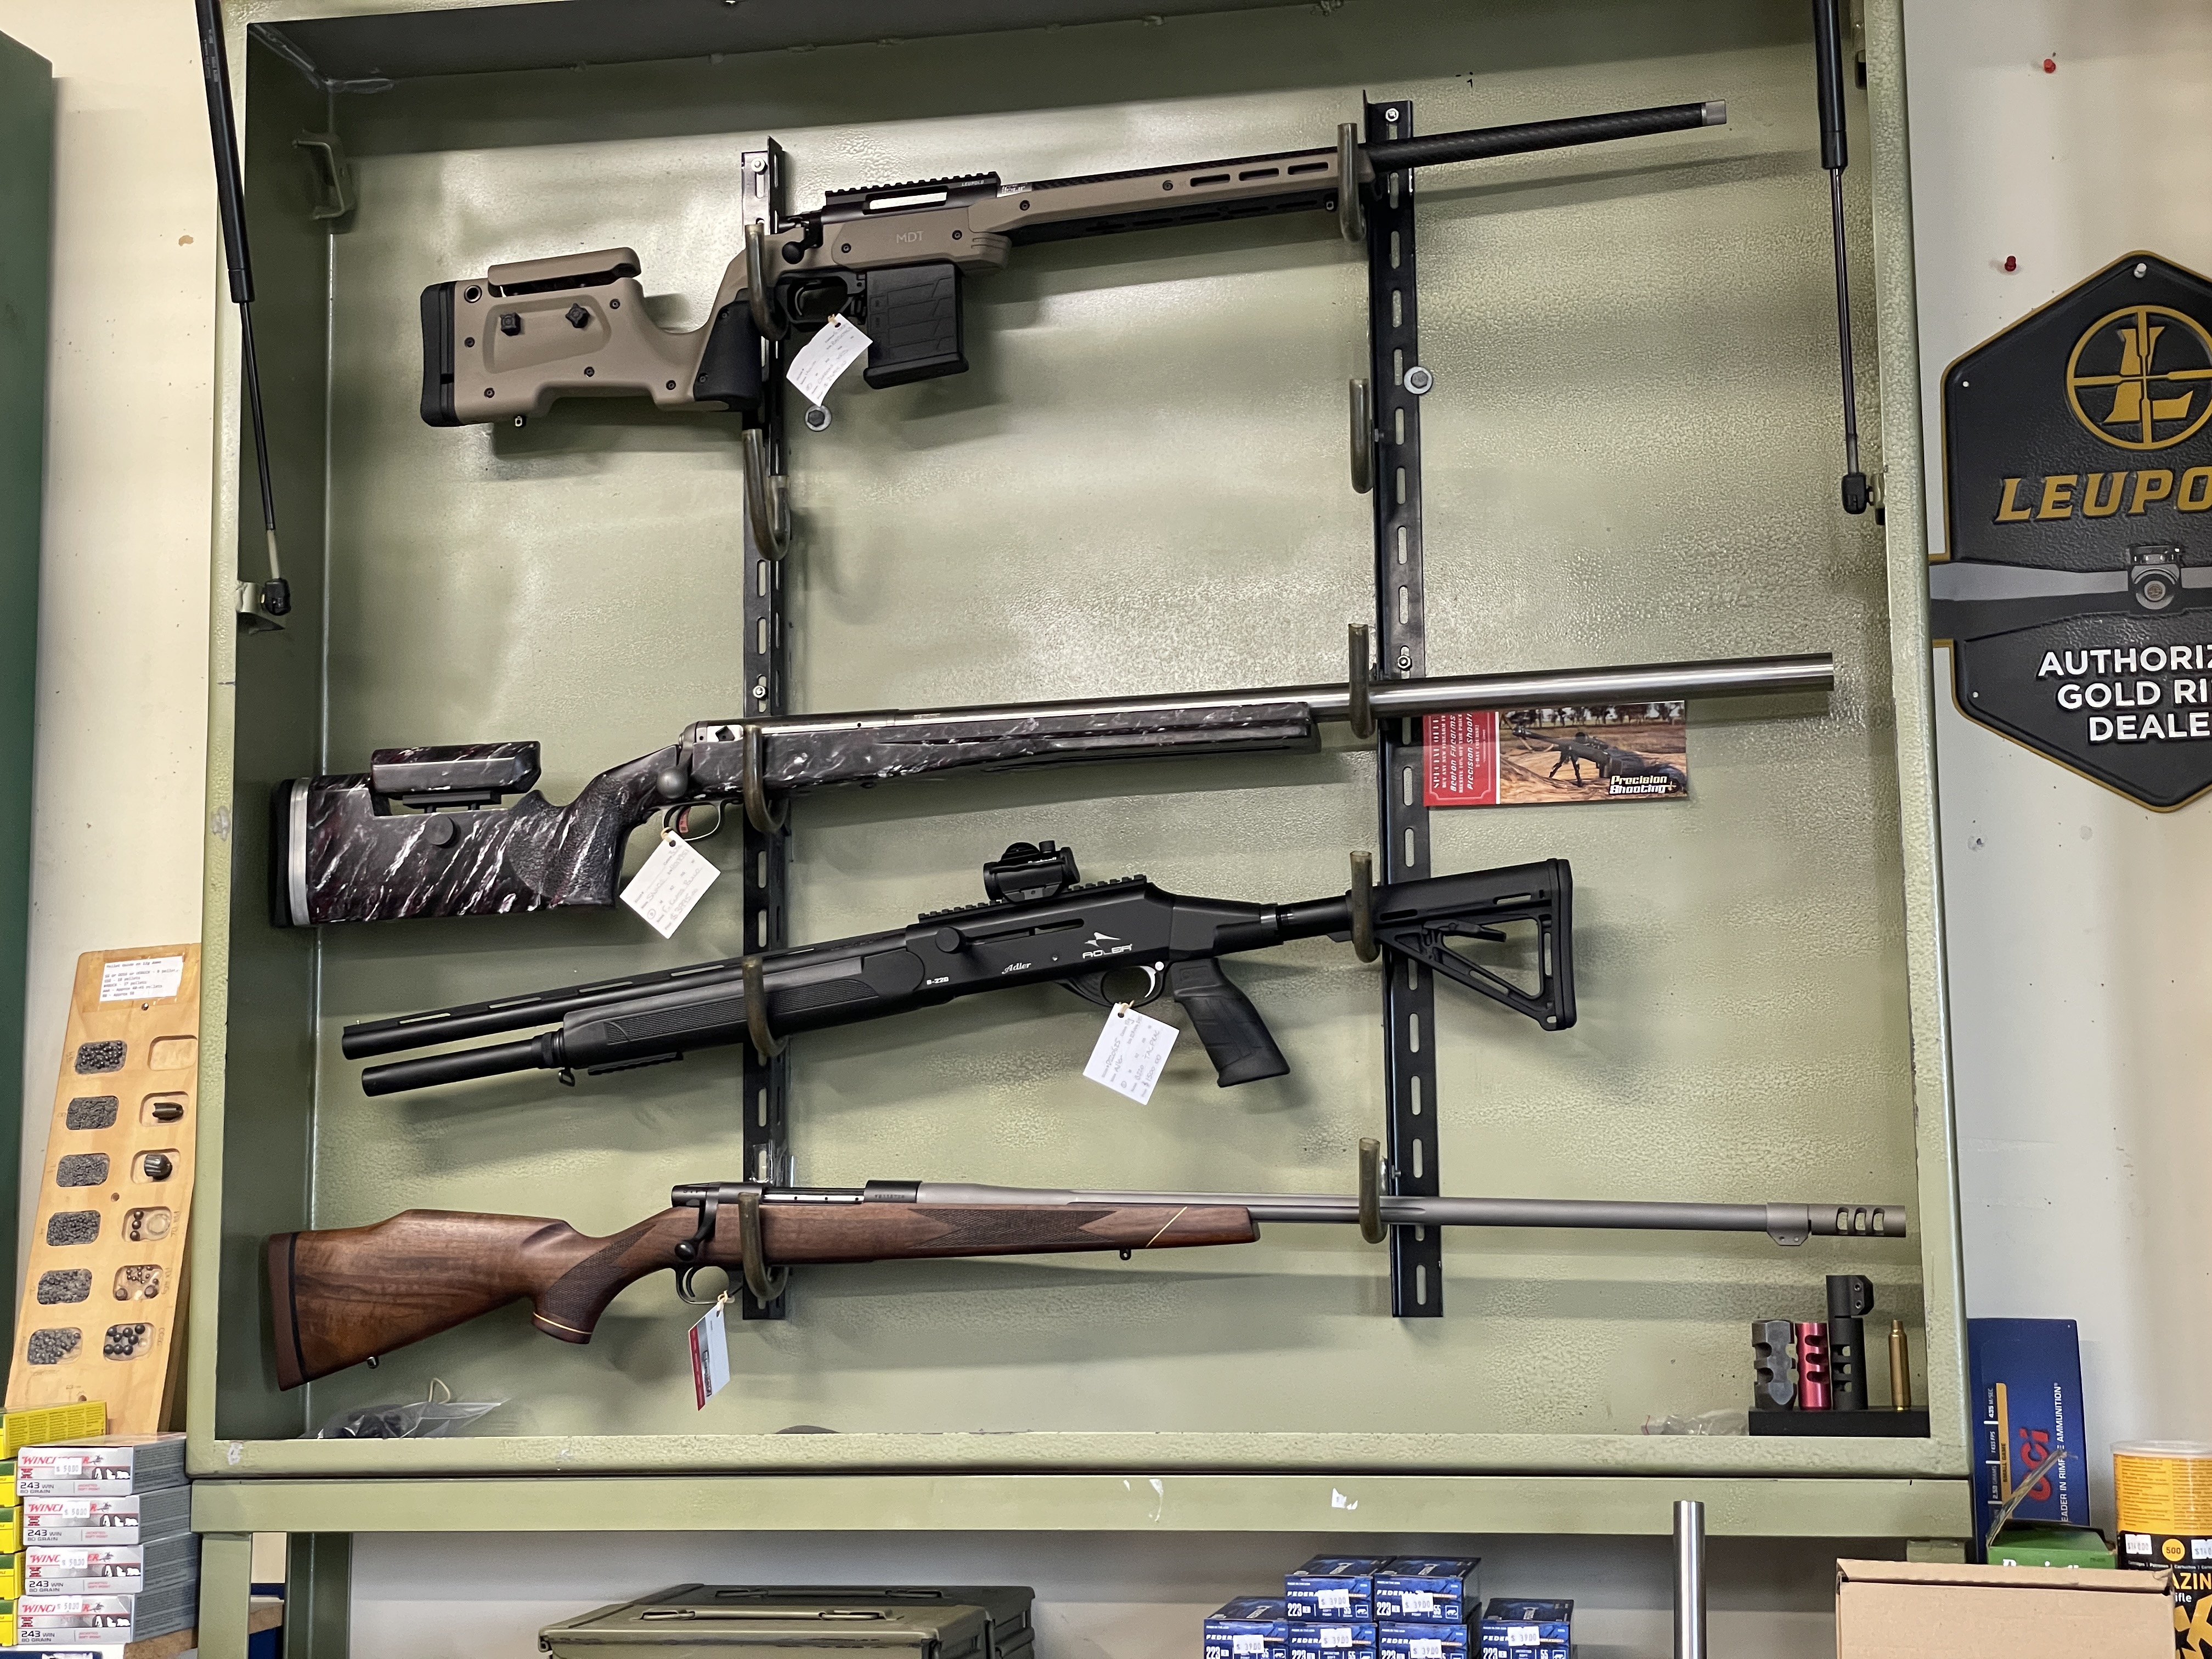 Bolt action rifles on display in a firearms store, identical function but are cosmetically different